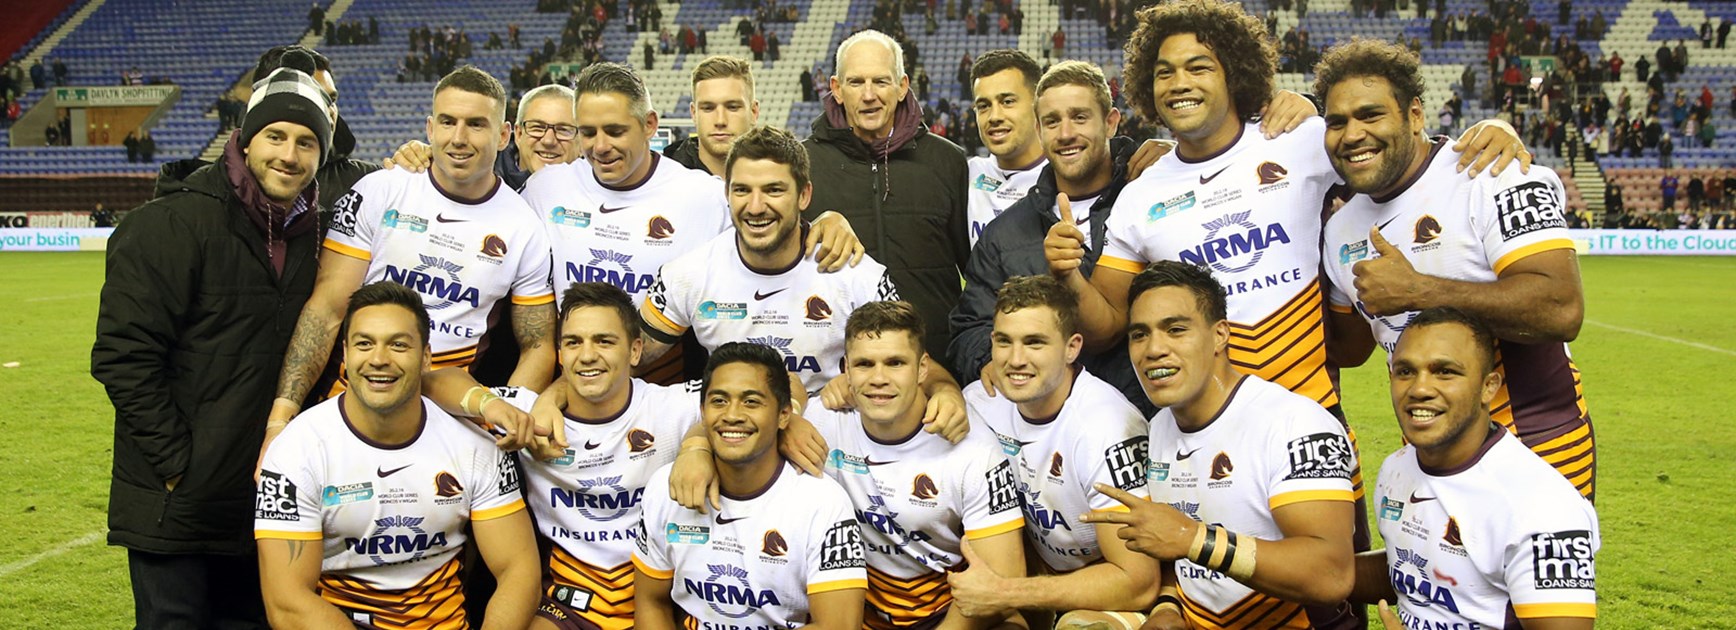 The victorious Brisbane Broncos following their 2016 World Club Series win over Wigan.